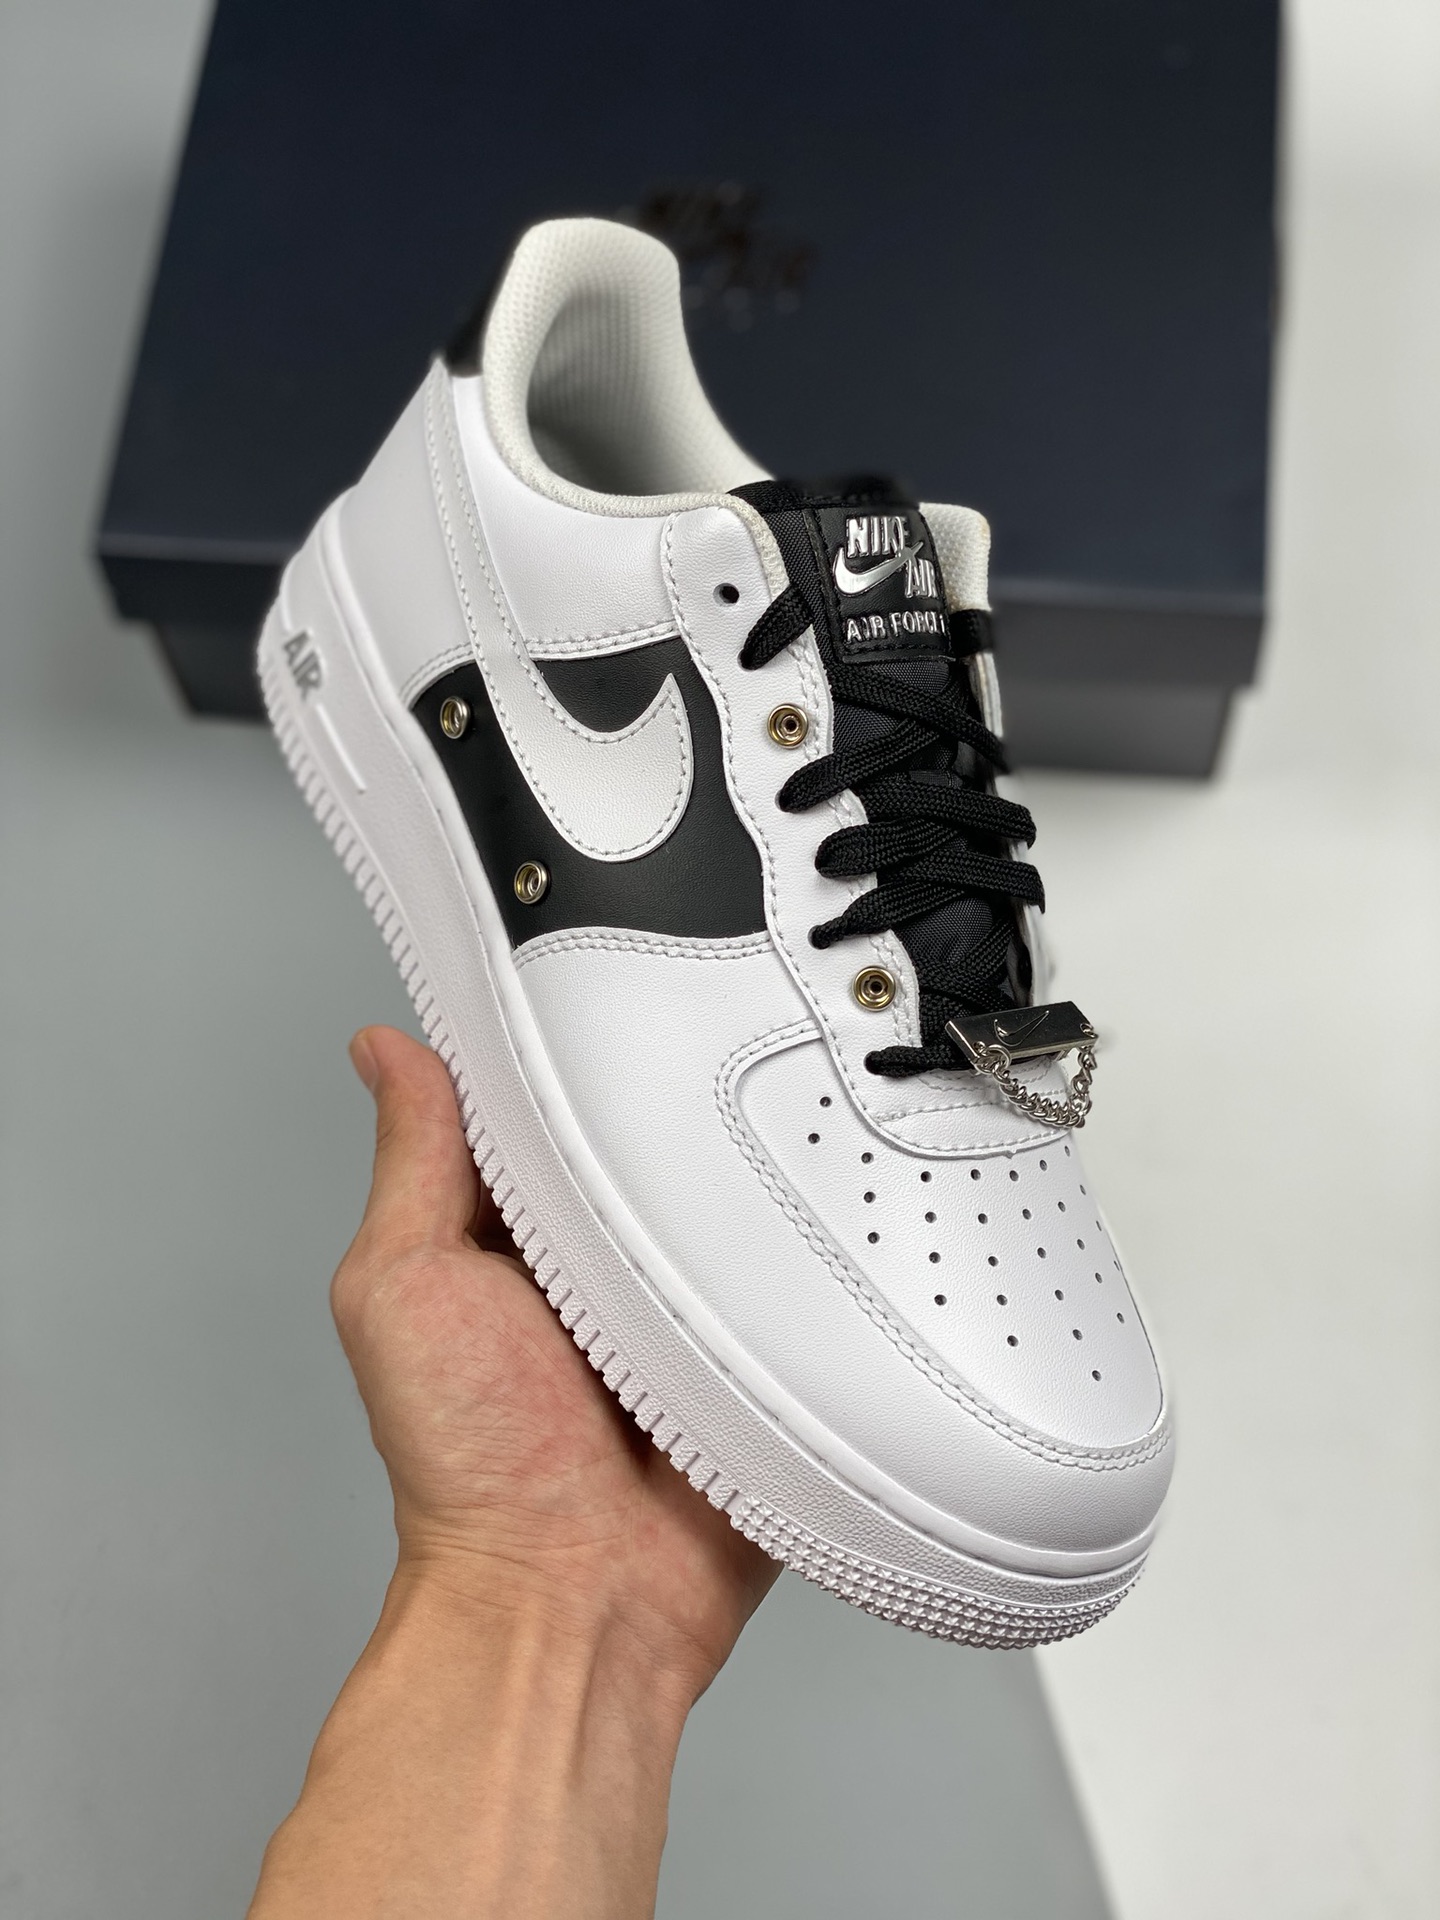 Nike Air AF Force 1 Low Snap Button Bling Black White Shoes